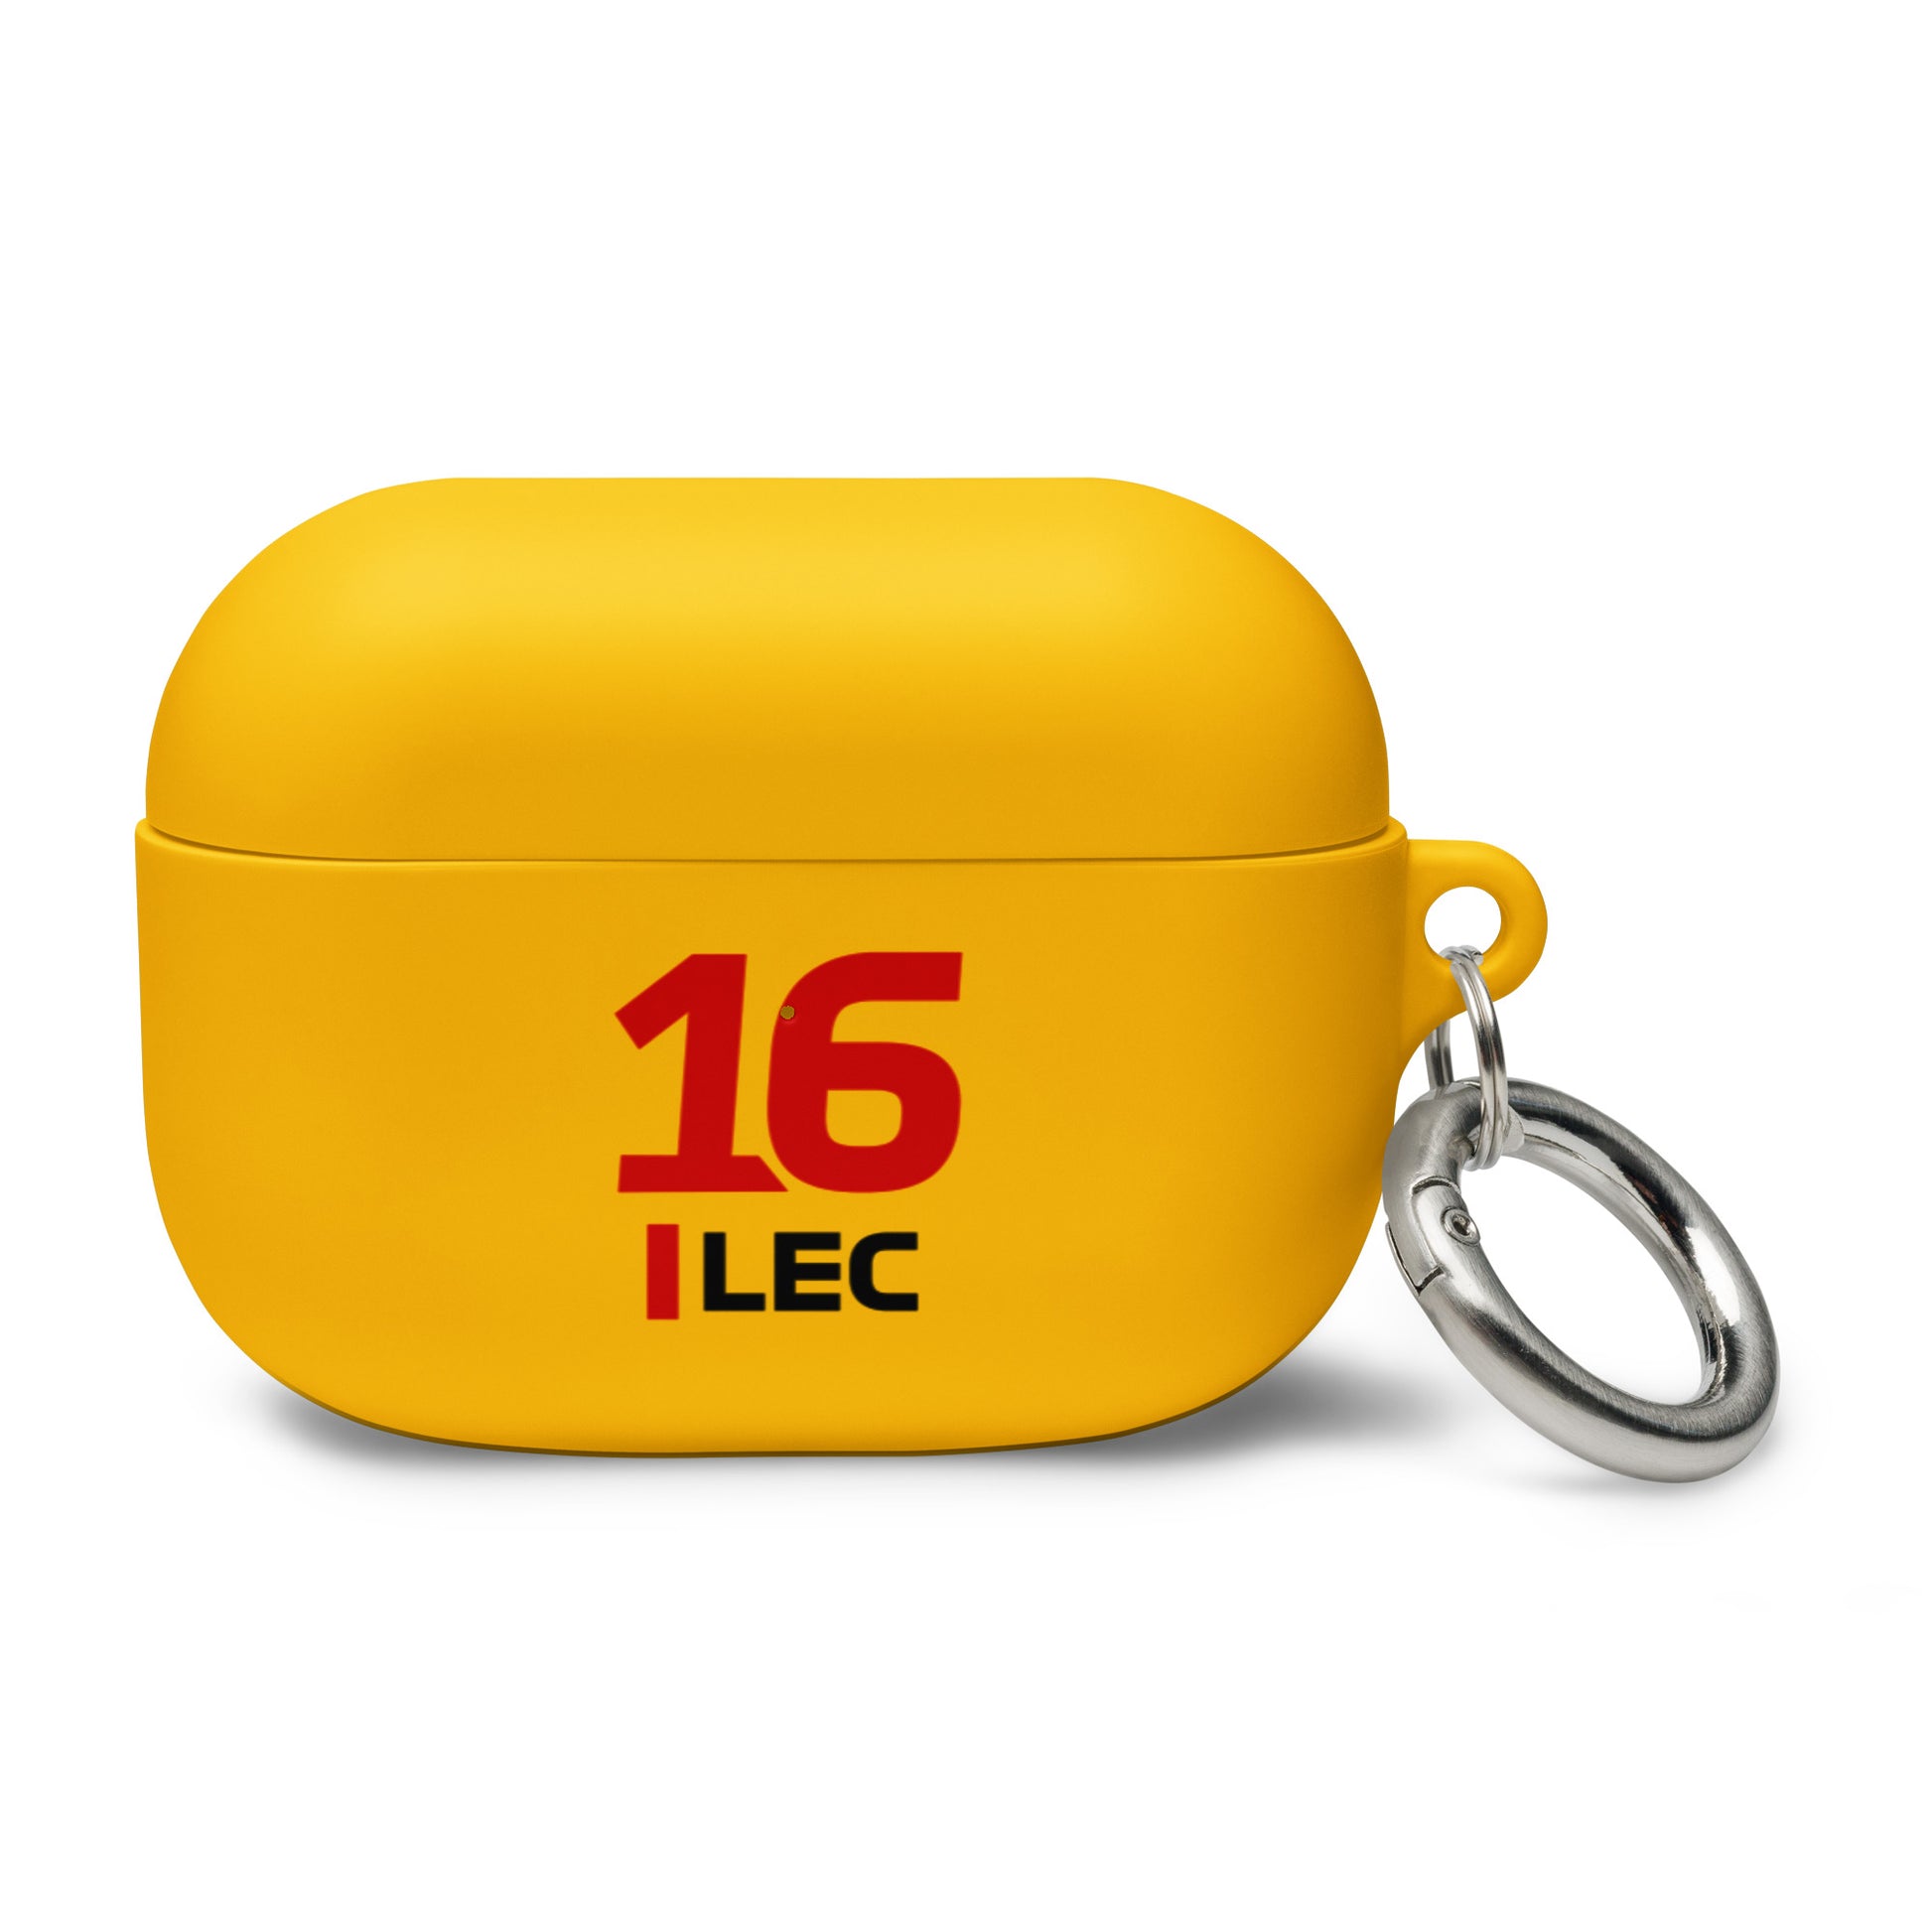 Charles Leclerc AirPods Case pro yellow